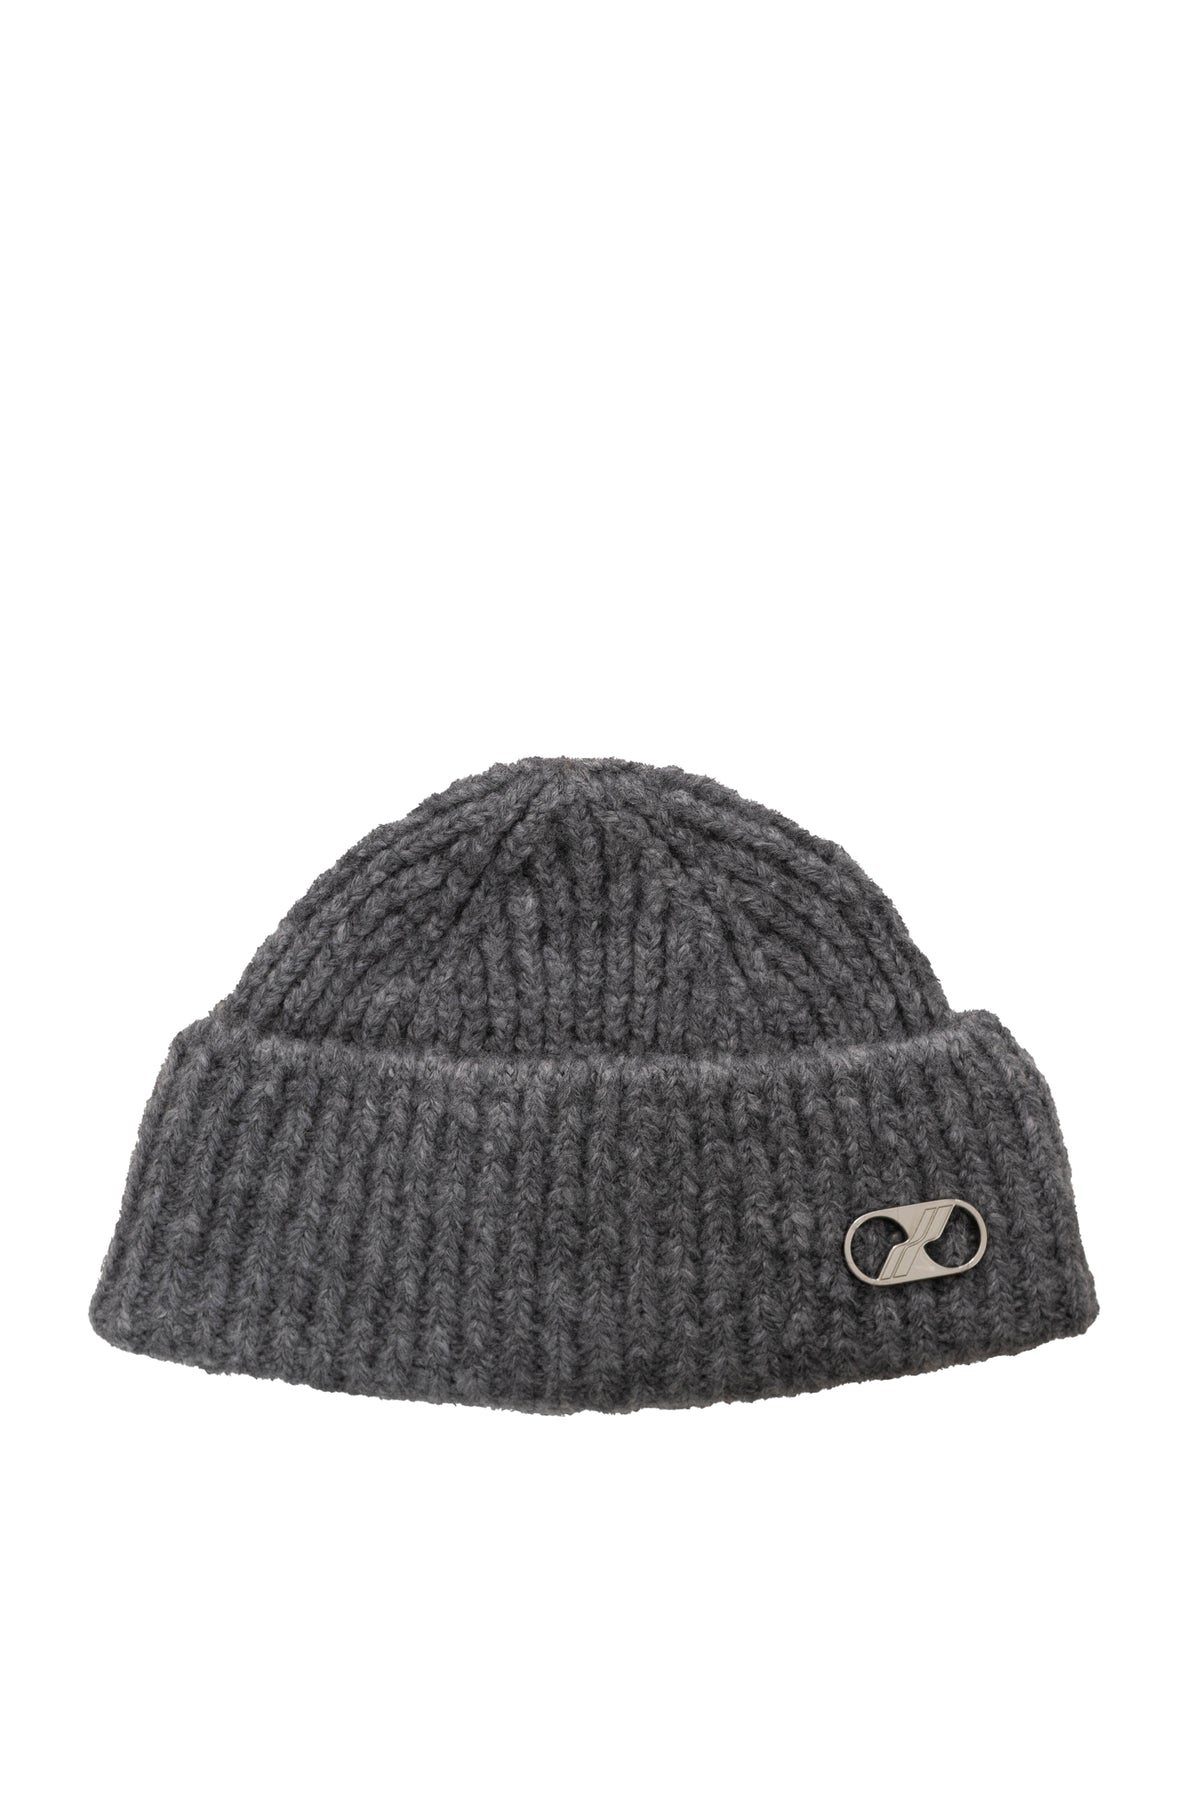 LIGHT GREY EMBROIDERED LOGO METAL SHORT BEANIE / L.GRY